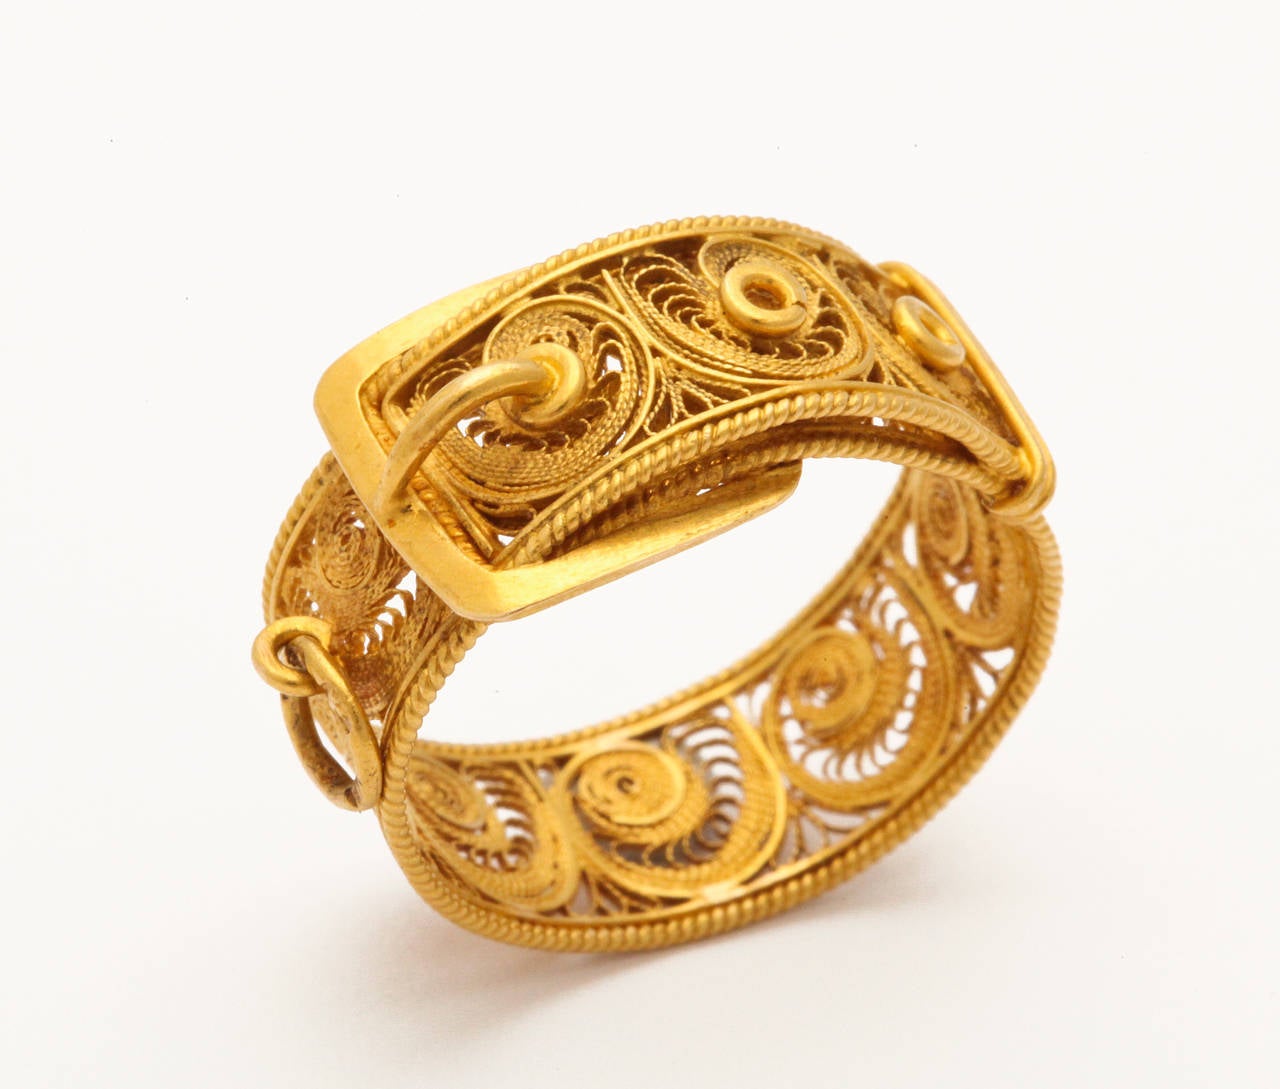 Women's or Men's Early Victorian Gold Filigree Buckle and Strap Ring